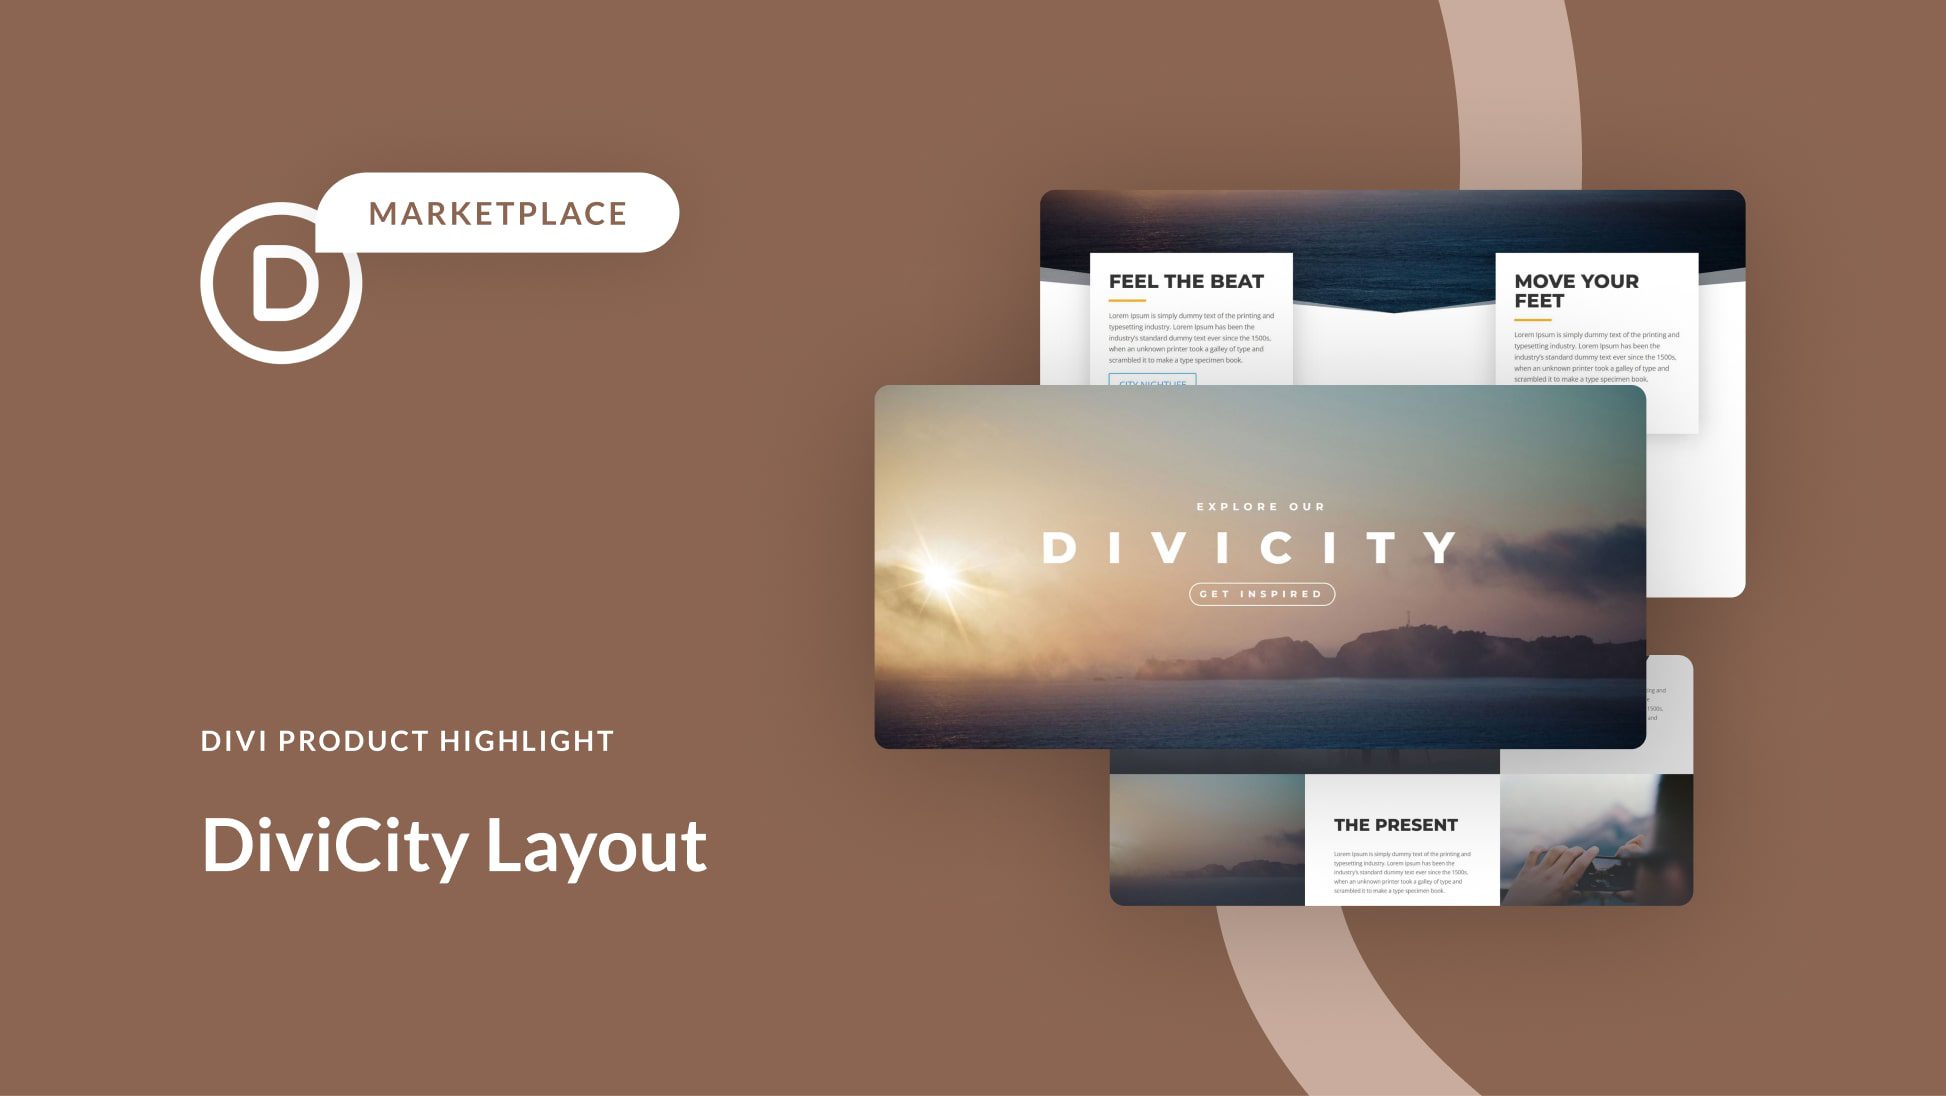 Divi Product Highlight: DiviCity